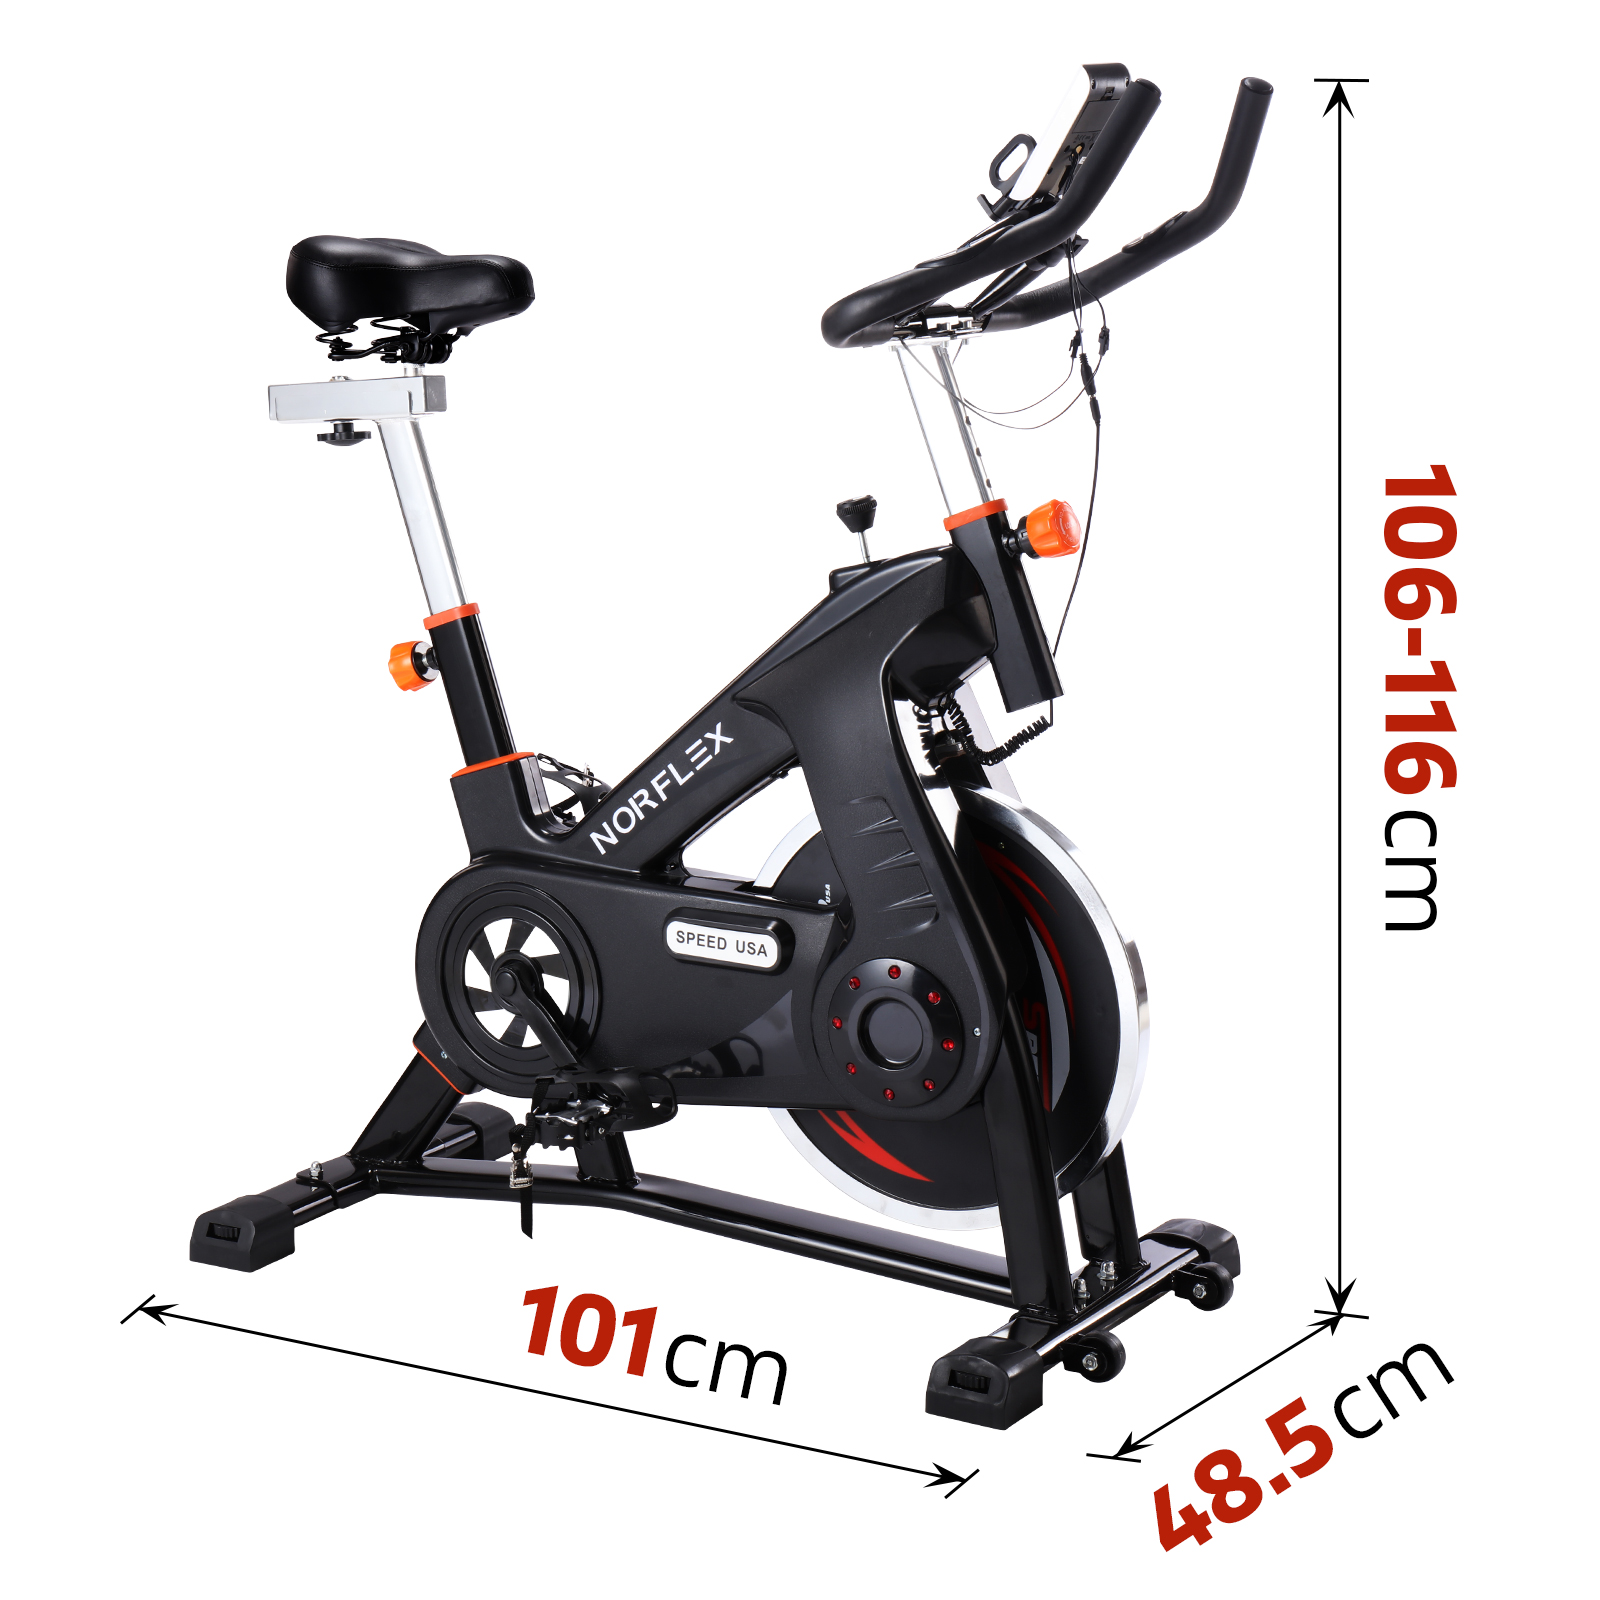 NORFLX Spin Bike Flywheel Commercial Gym Exercise Home Workout Bike Fitness Black